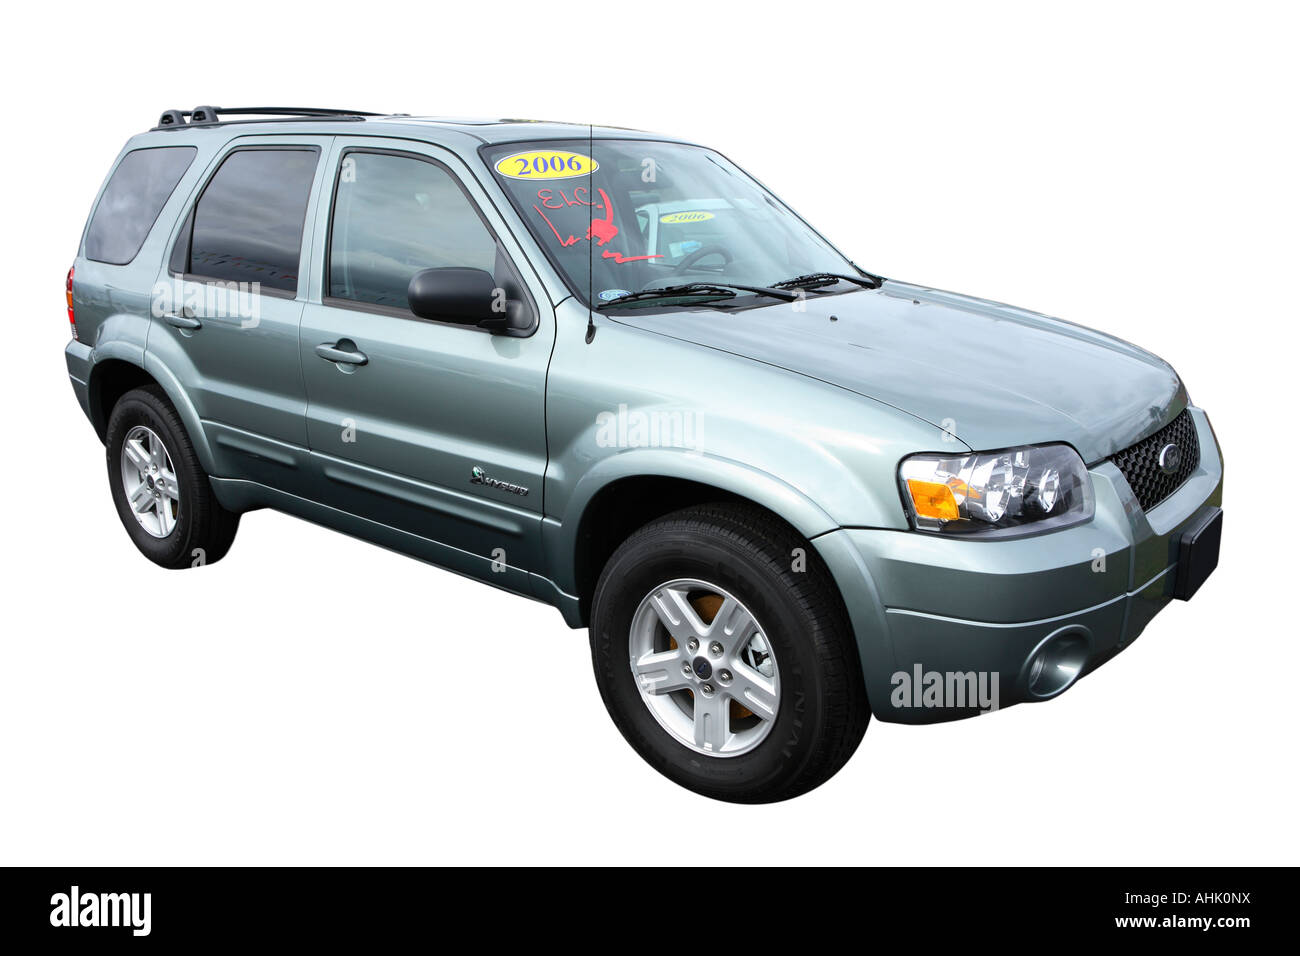 2006 Ford Escape Hybrid SUV cut out on white background Stock Photo - Alamy